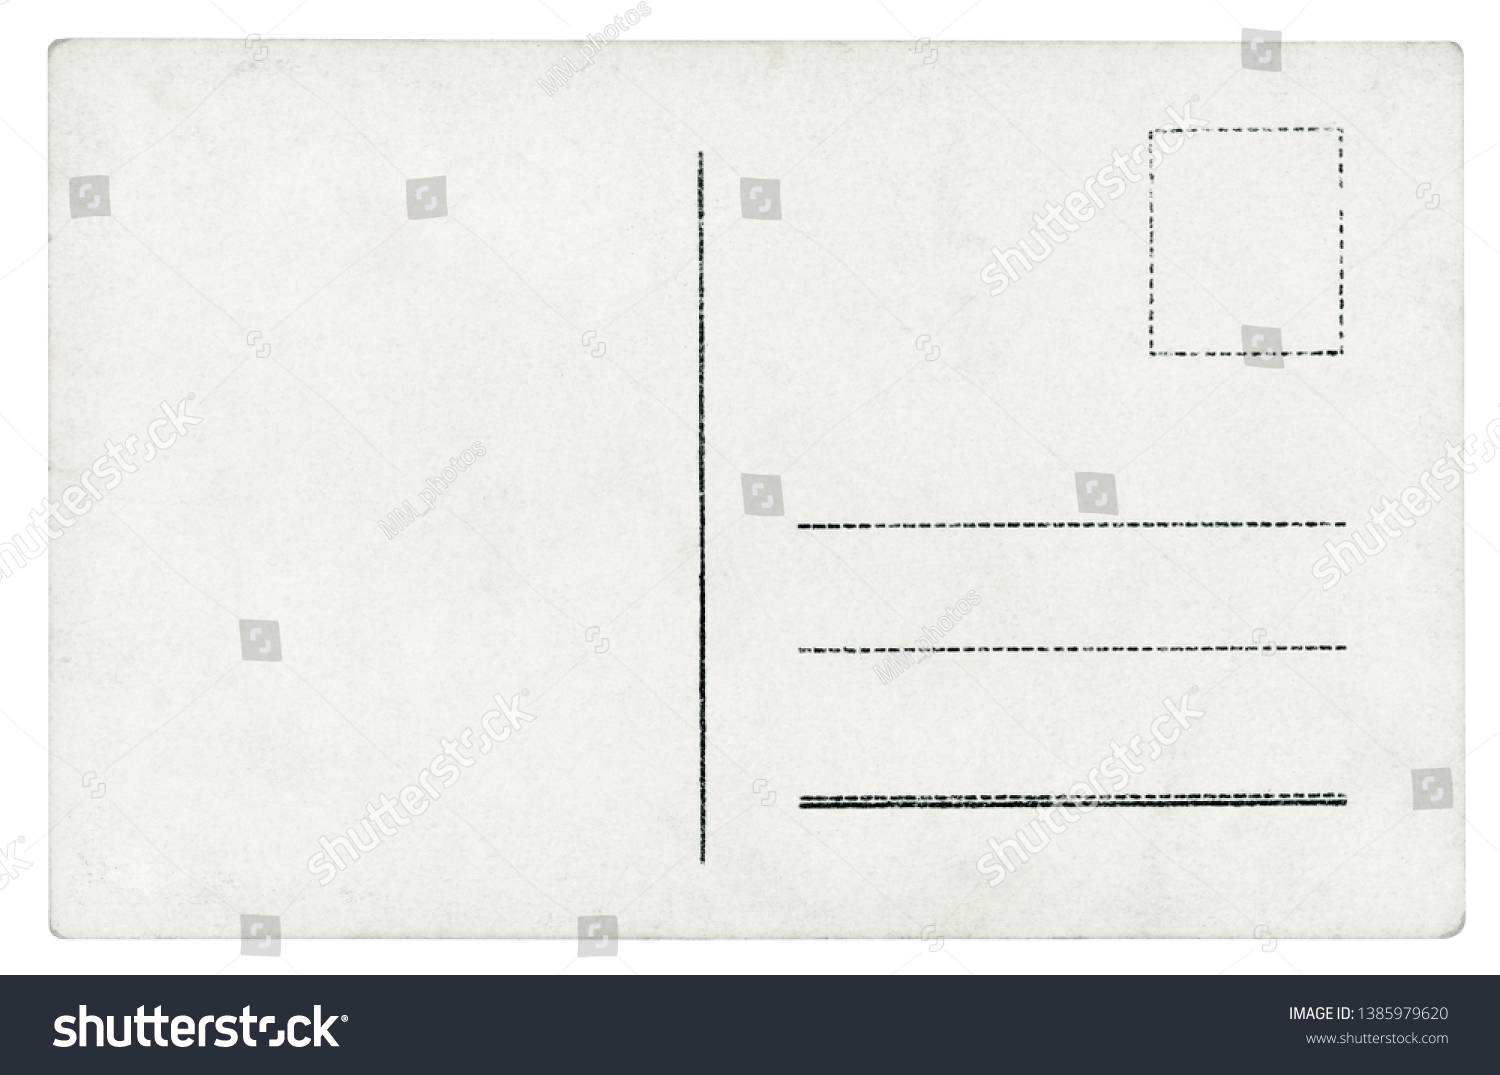 Vintage Postcard - isolated (clipping path included) #1385979620